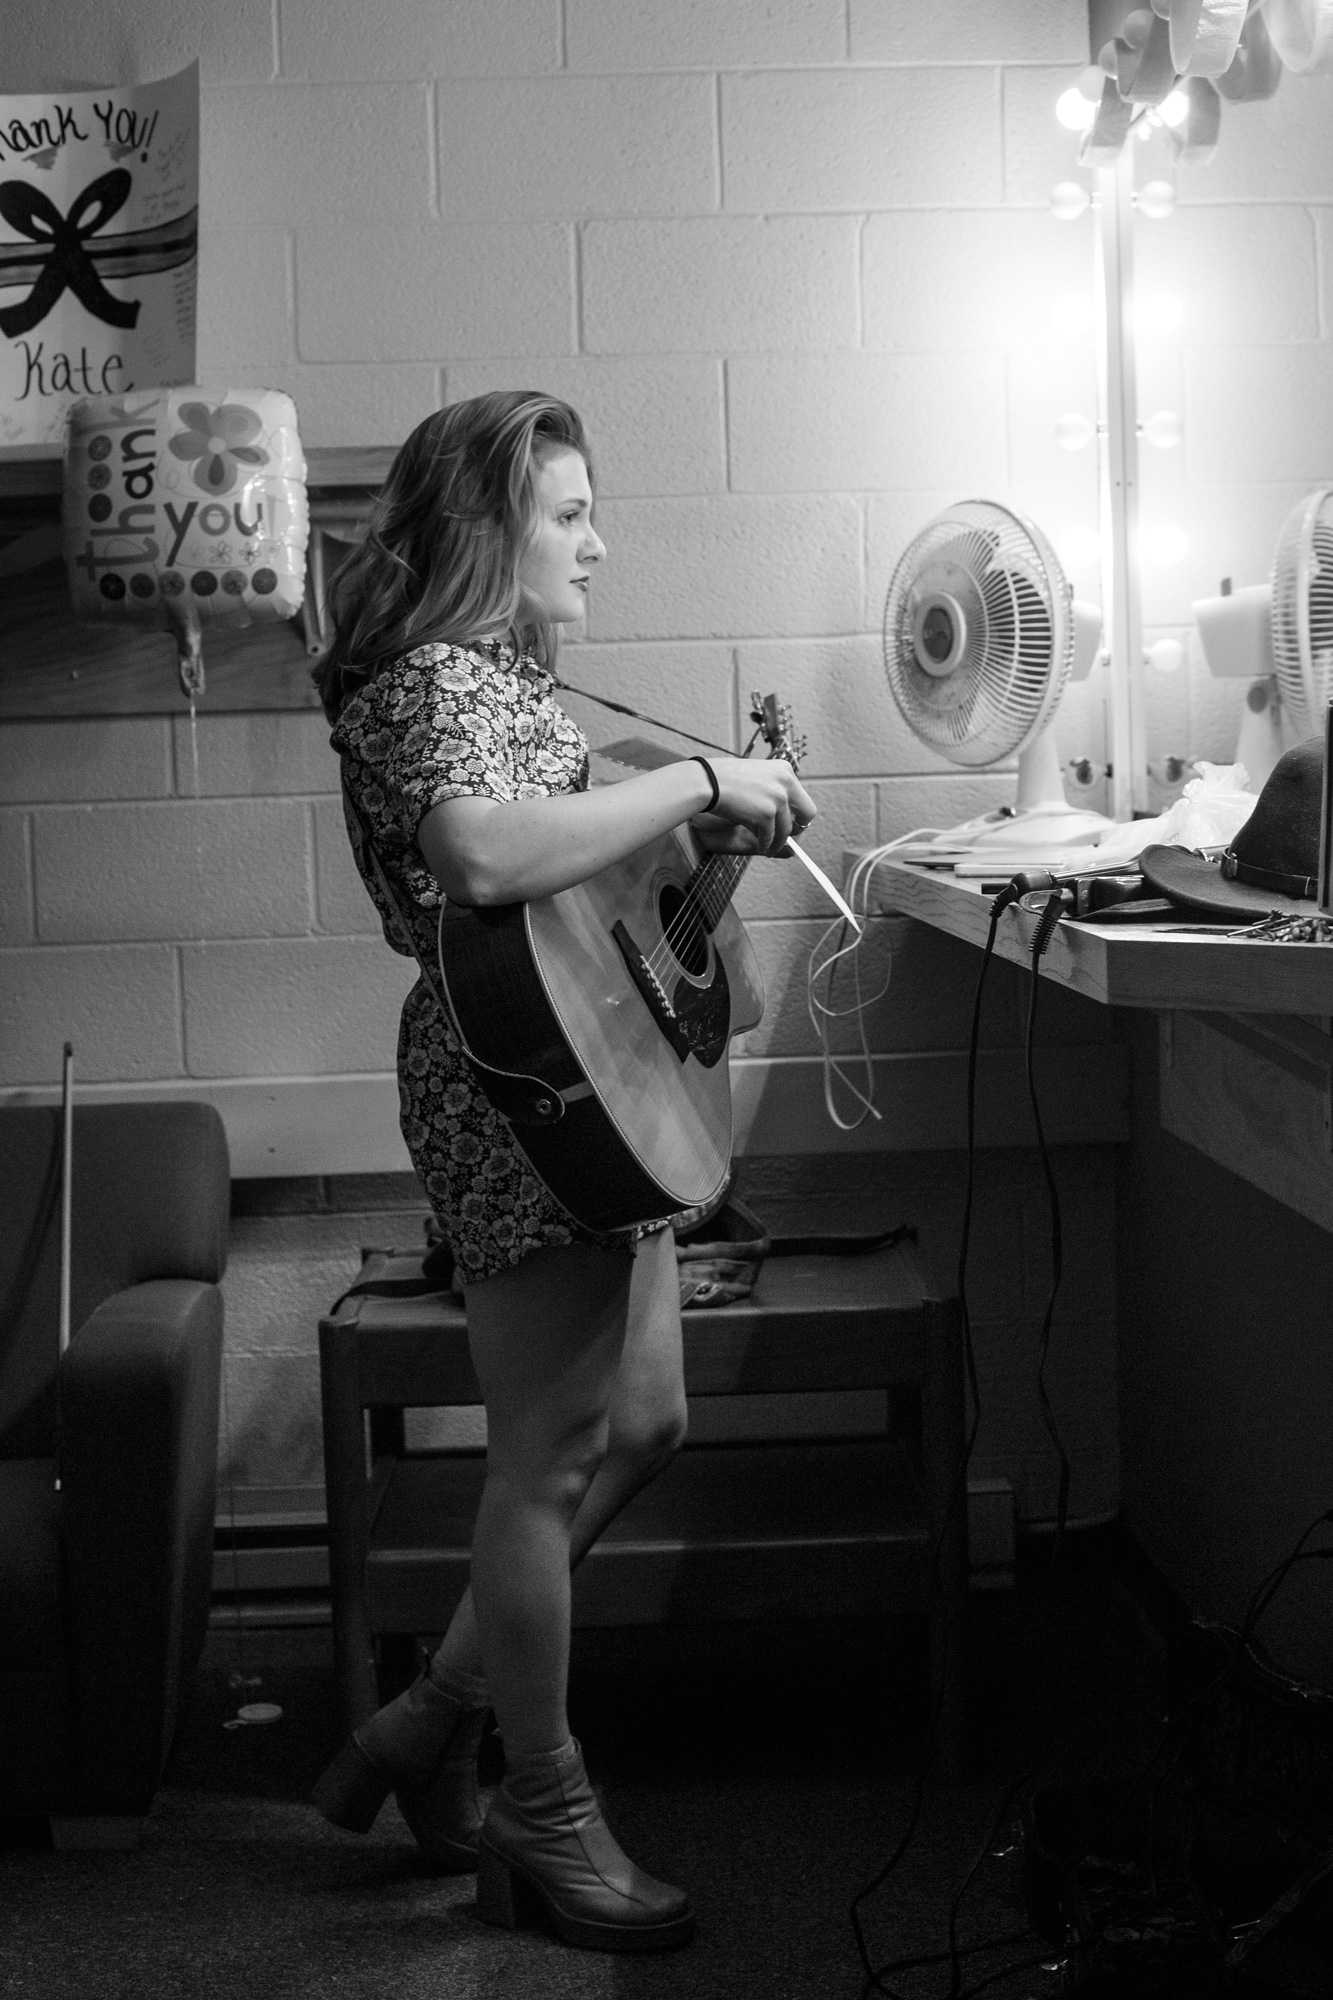 Kate Rhudy prepares to perform as the opening act for Mipso on Thursday, April 21 at Legends. Photo courtesy Kendall Bailey Atwater.